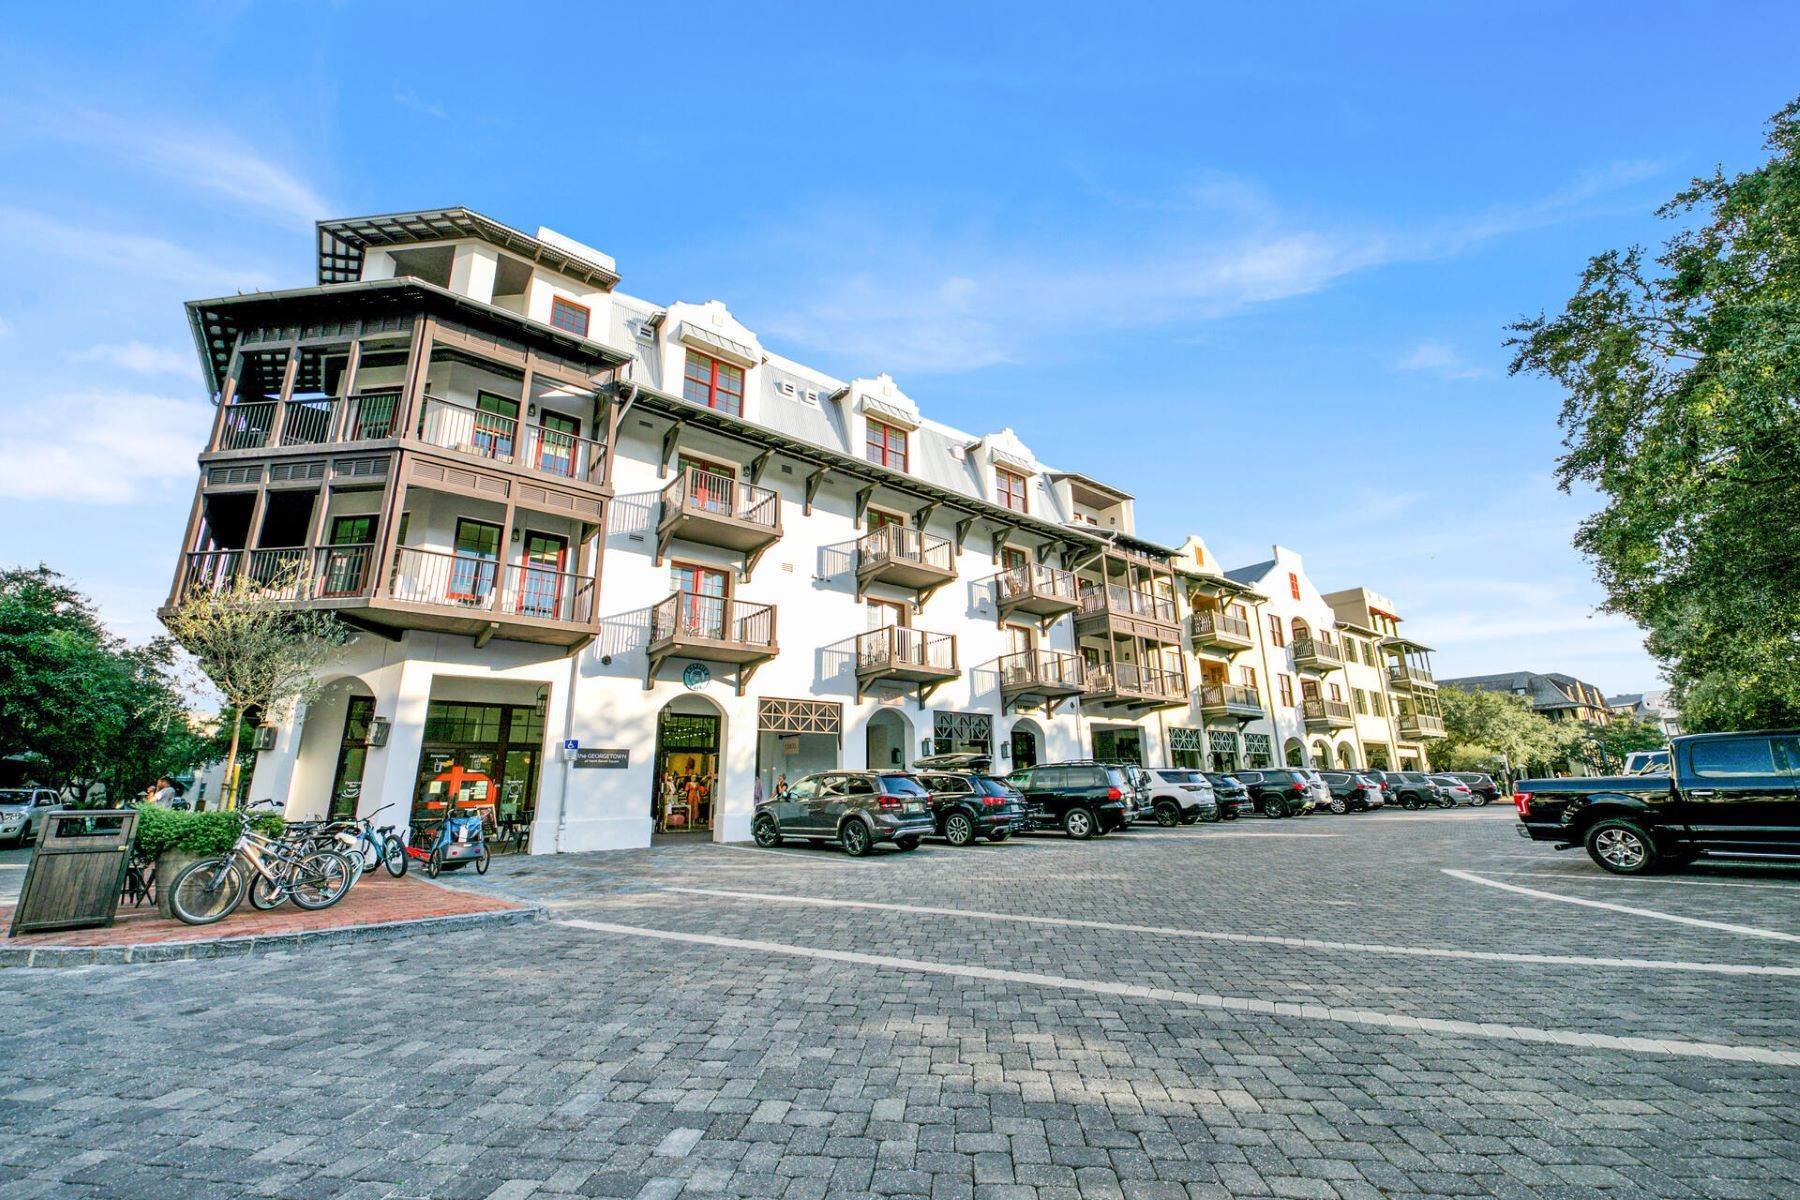 Condominiums for Sale at Pristine Condo With Balconies Overlooking Vibrant Town Square 46 North Barrett Square, 303 Rosemary Beach, Florida 32461 United States